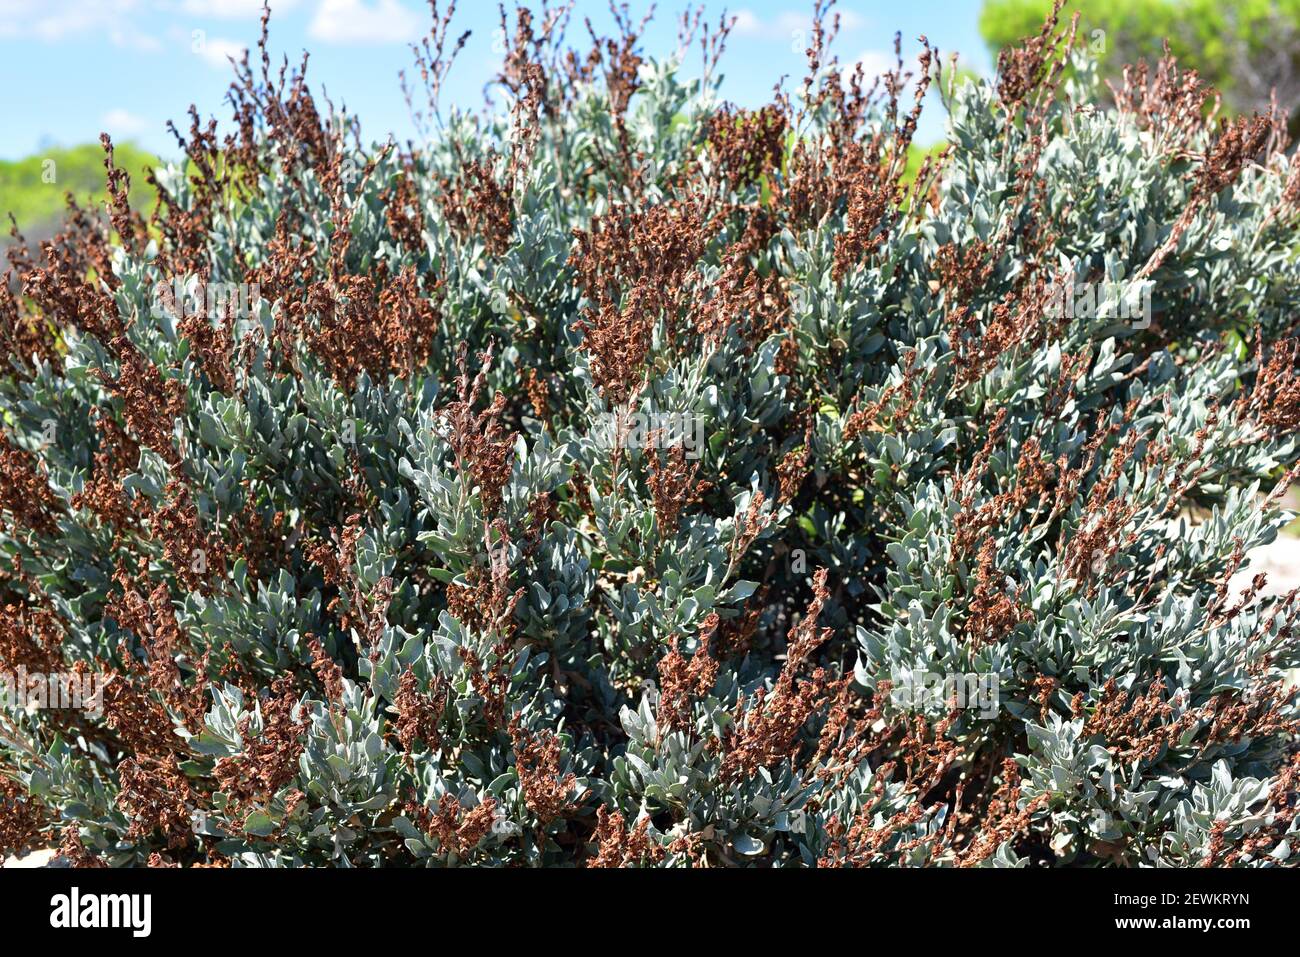 Salado (Limoniastrum monopetalum) is an halophyte shrub native to northwestern Africa and southwestern Spain and naturalized in Delta del Ebro. This Stock Photo